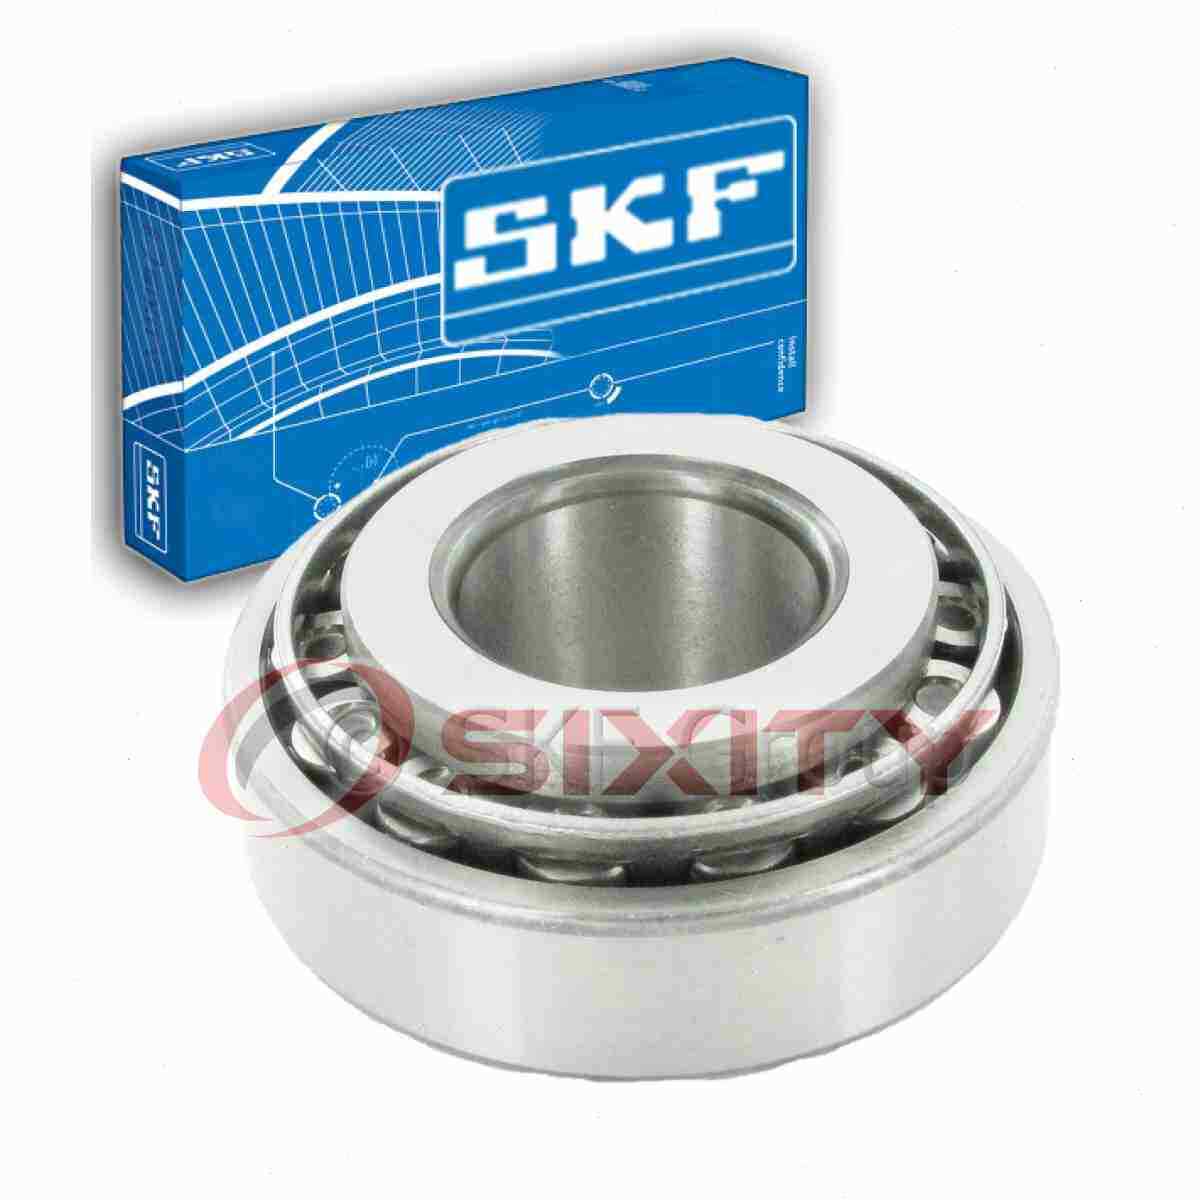 SKF Front Outer Wheel Bearing for 1972-1989 Plymouth Gran Fury Axle fz